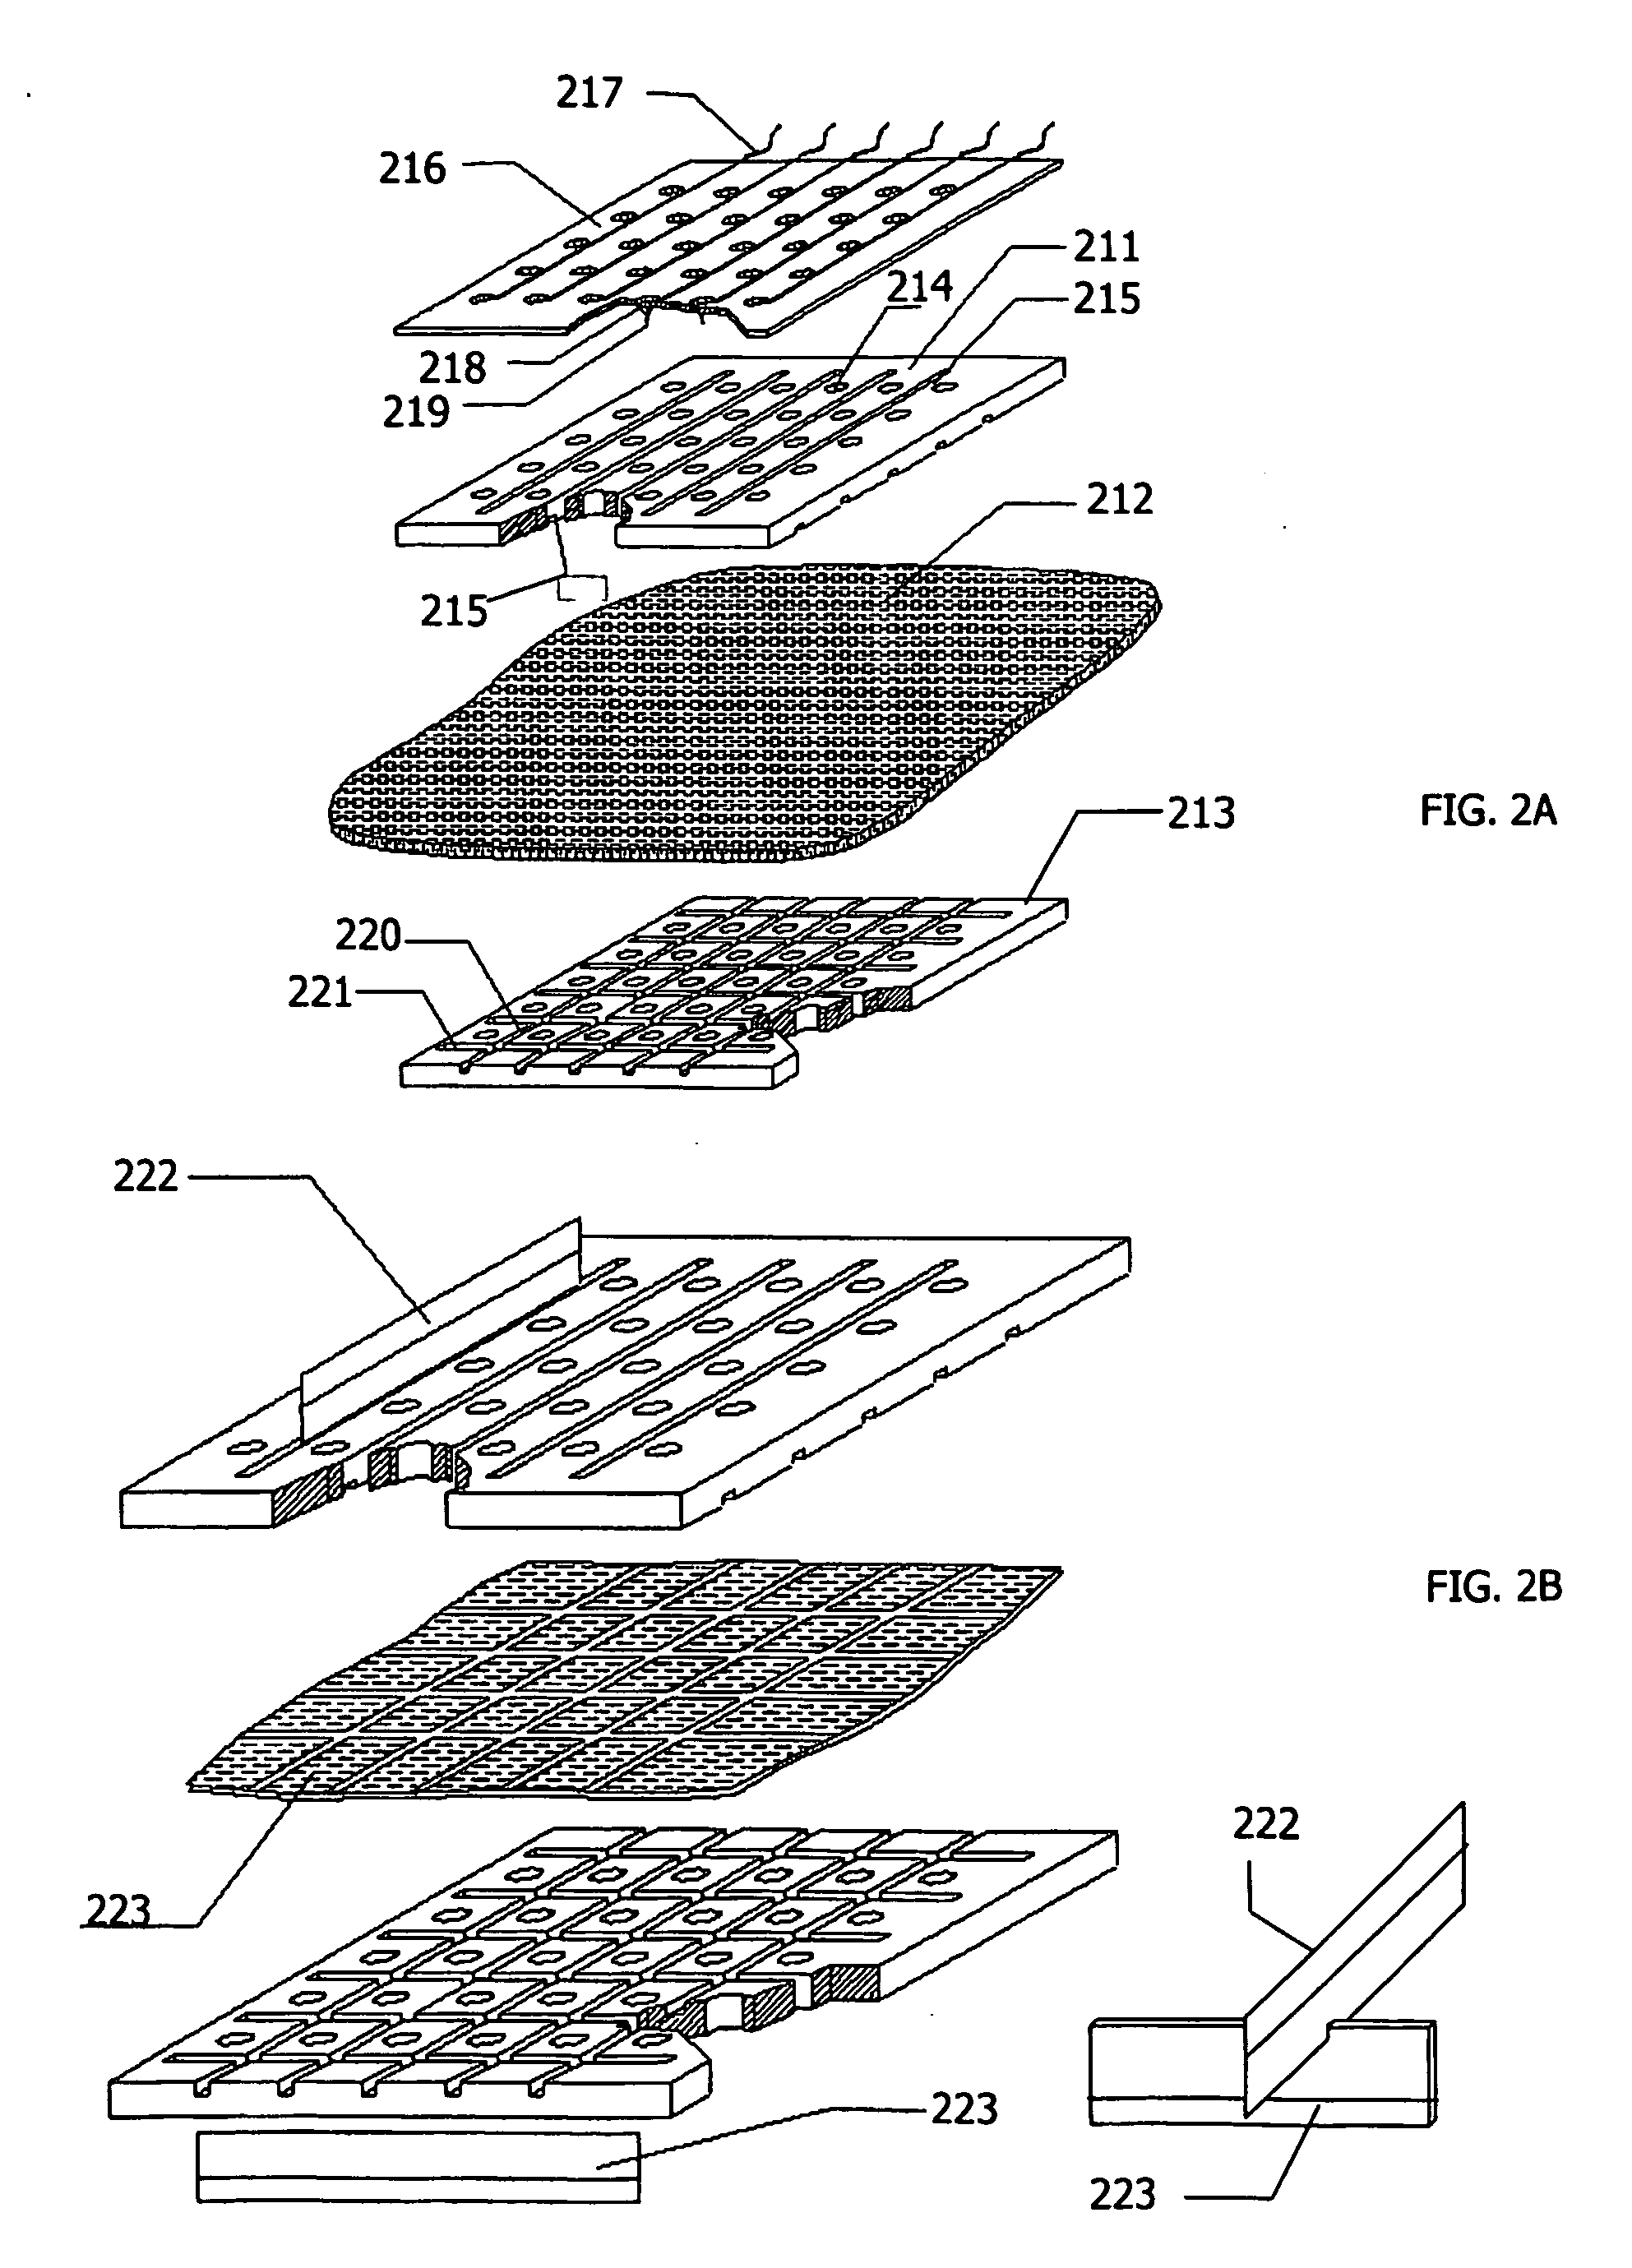 Apparatus and methods for evaluating the barrier properties of a membrane